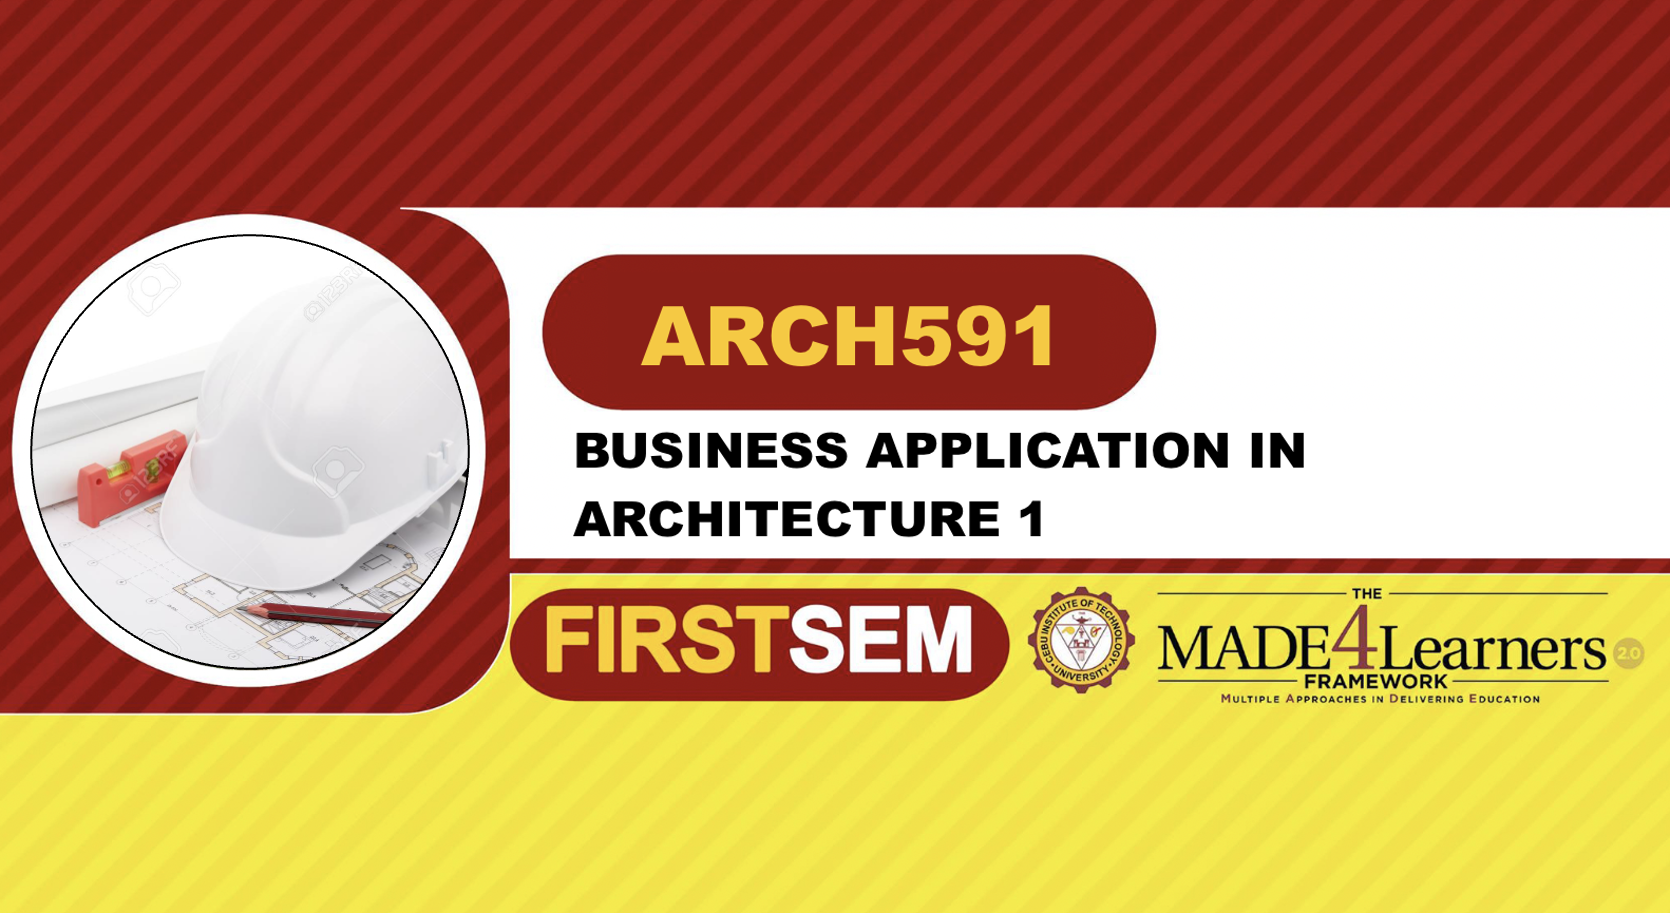 ARCH591: BUSINESS MANAGEMENT APPLICATION FOR ARCHITECTURE 1